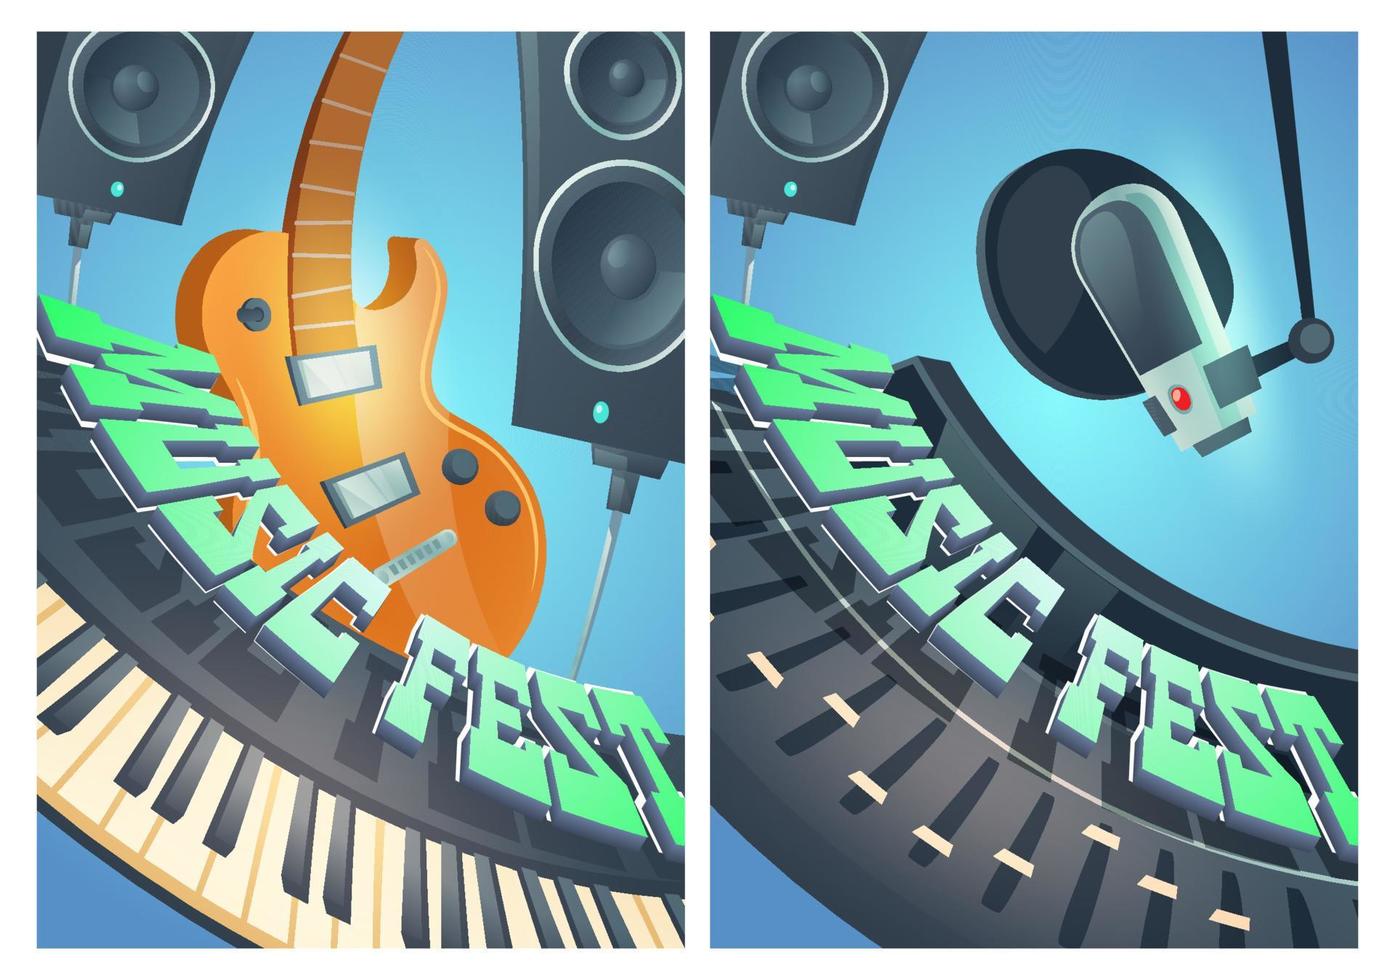 Music fest cartoon posters with electric guitar vector